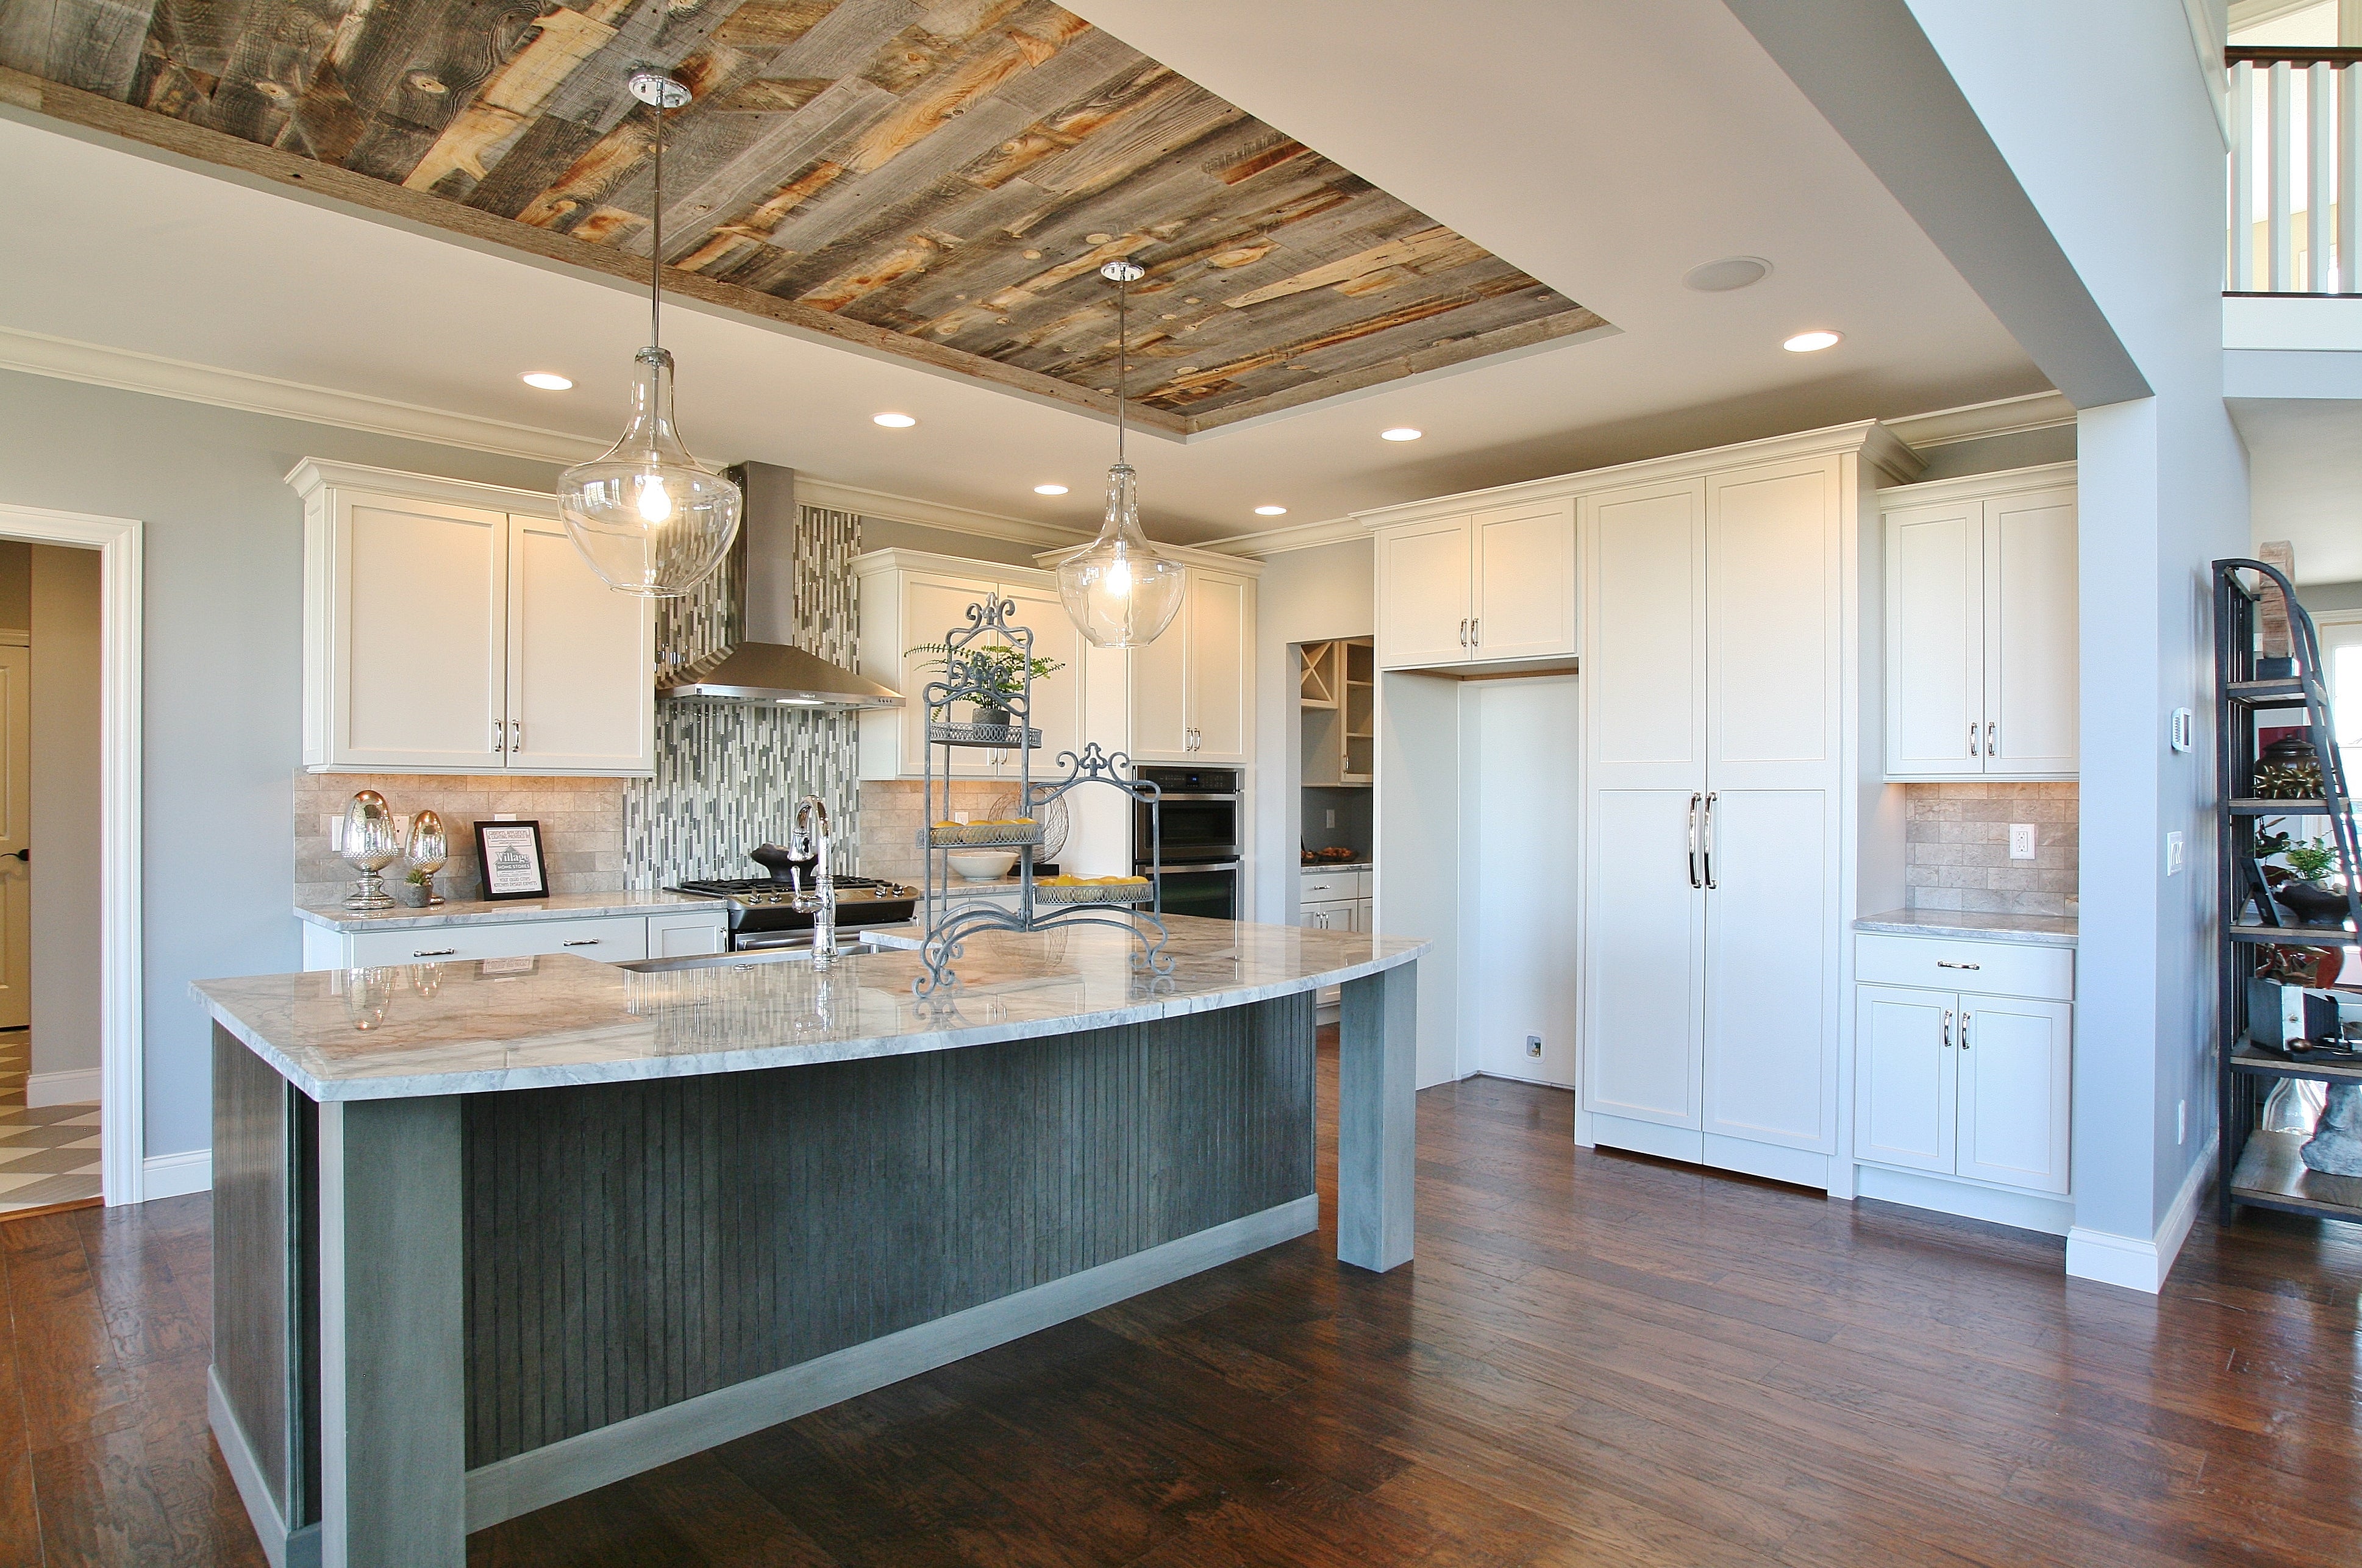 Top 7 Reclaimed Wood Kitchen Wall Ideas